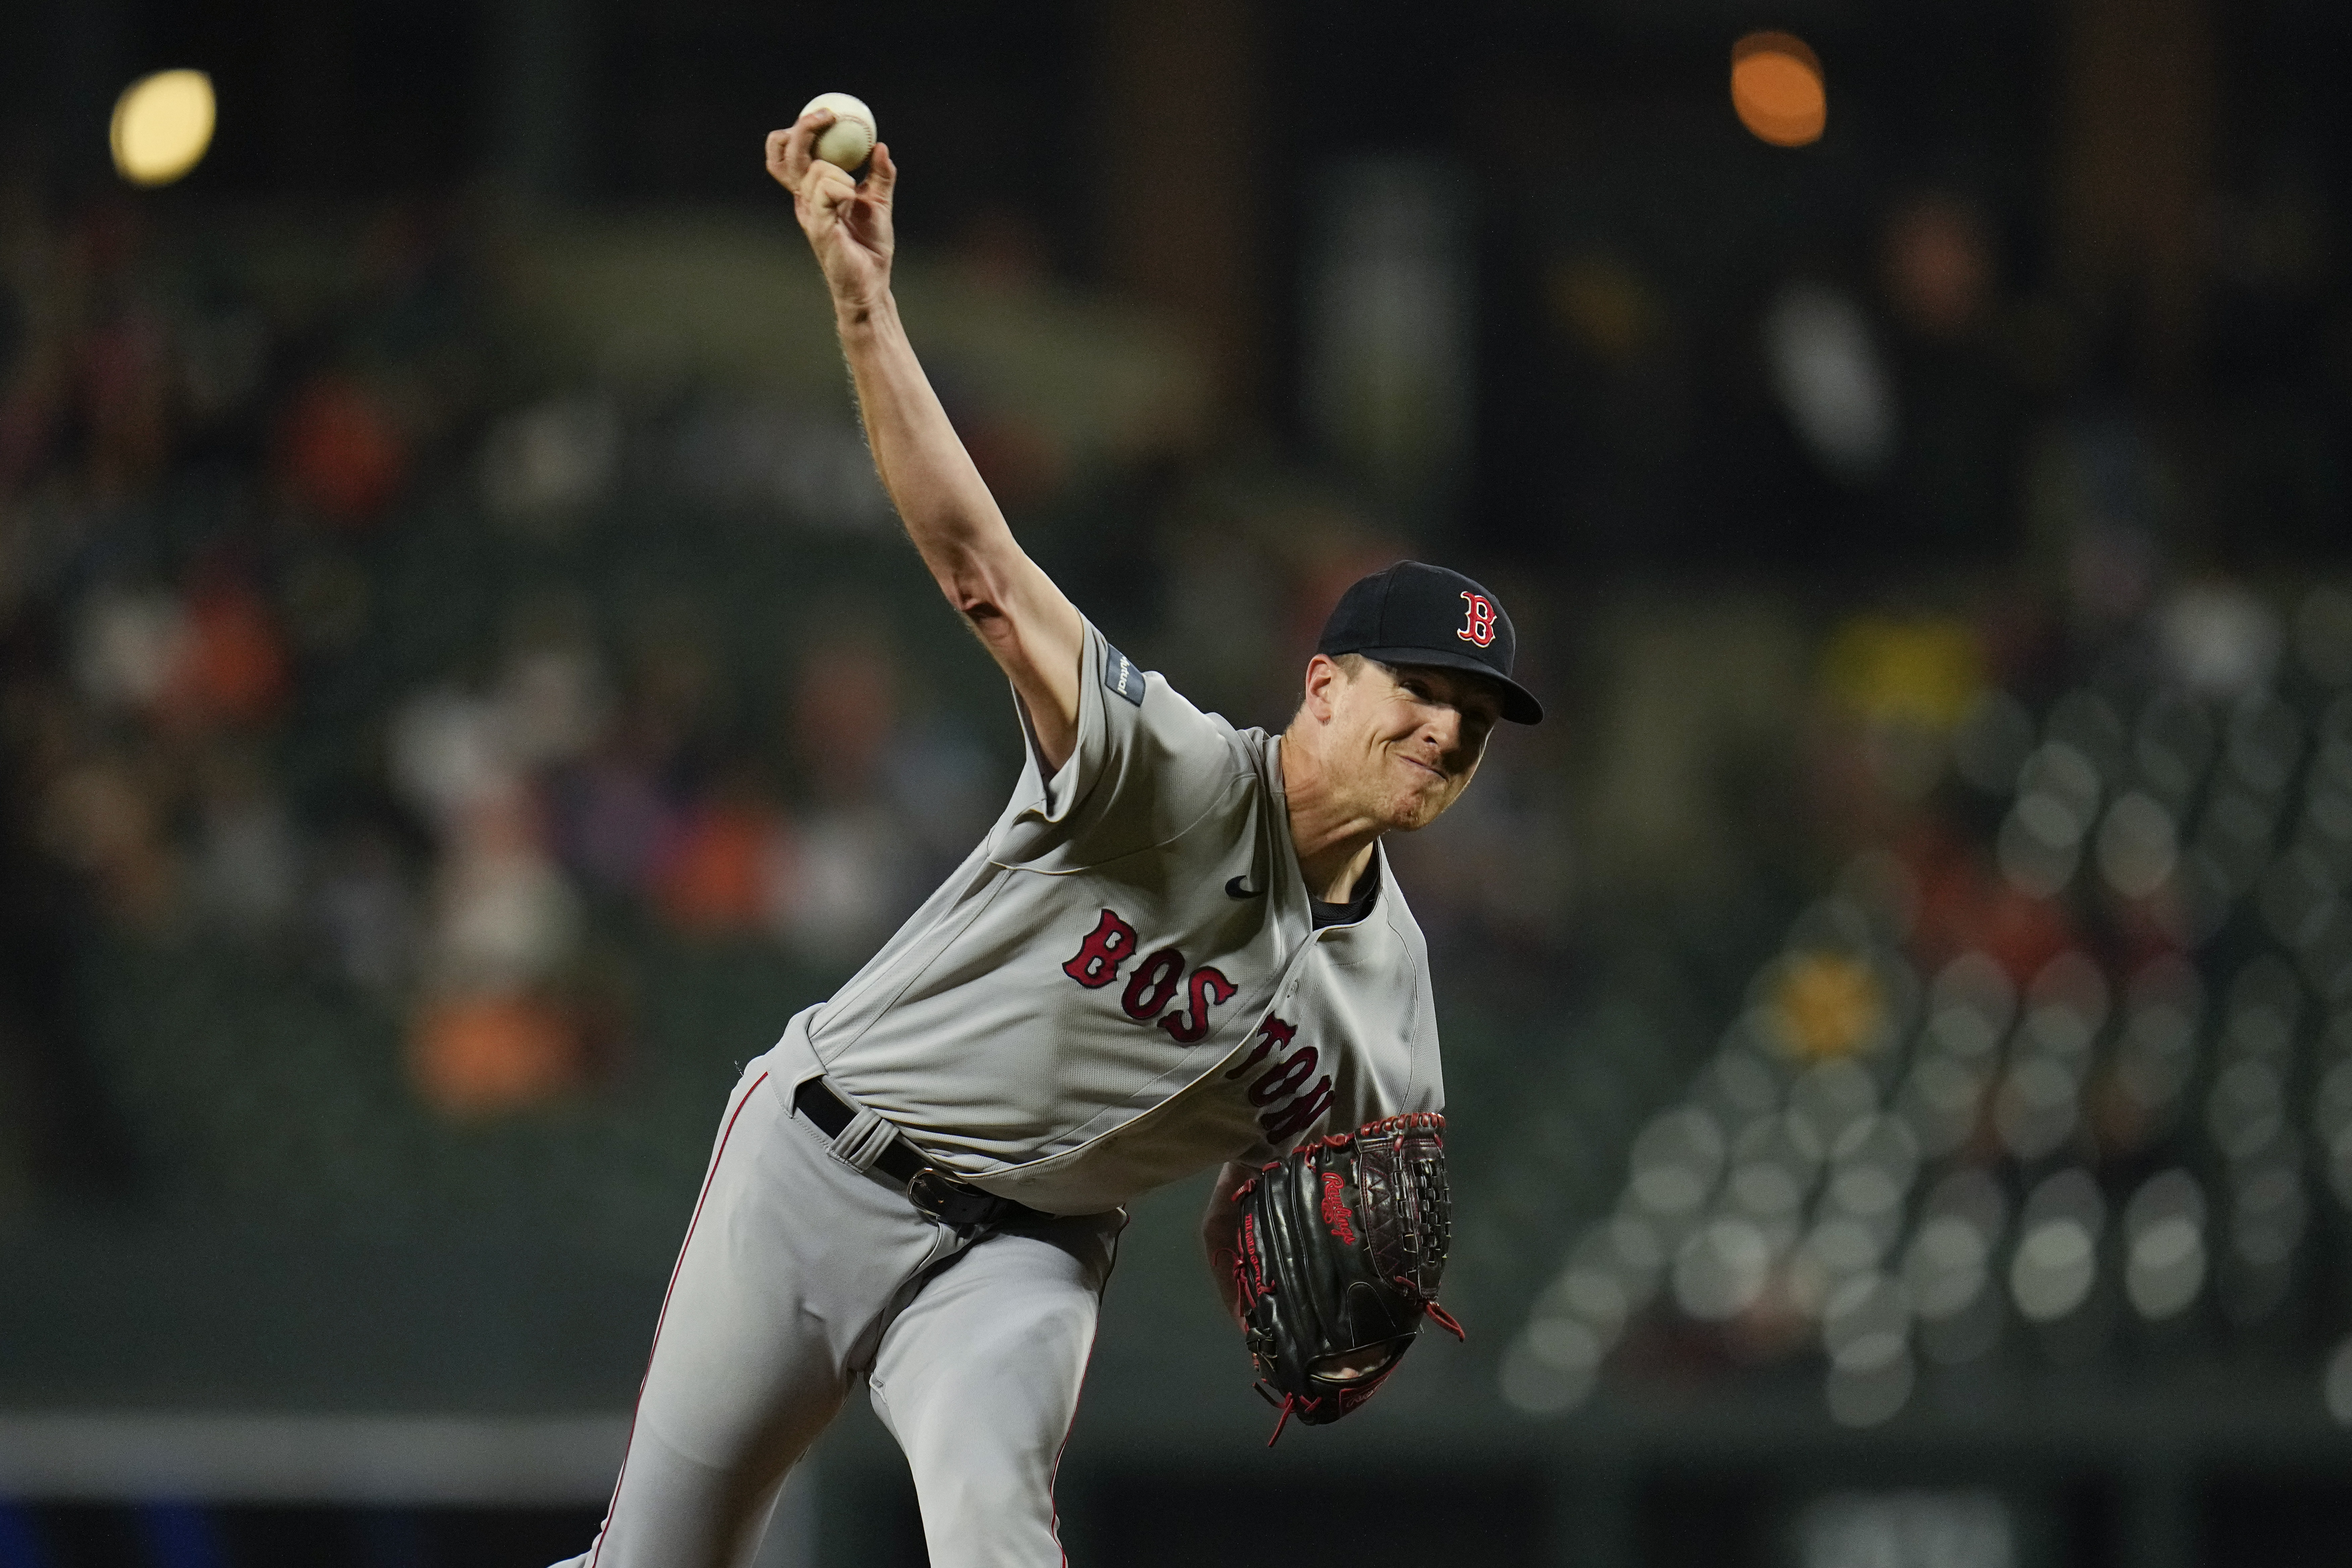 Chris Sale logs five strong innings in Red Sox loss to Orioles